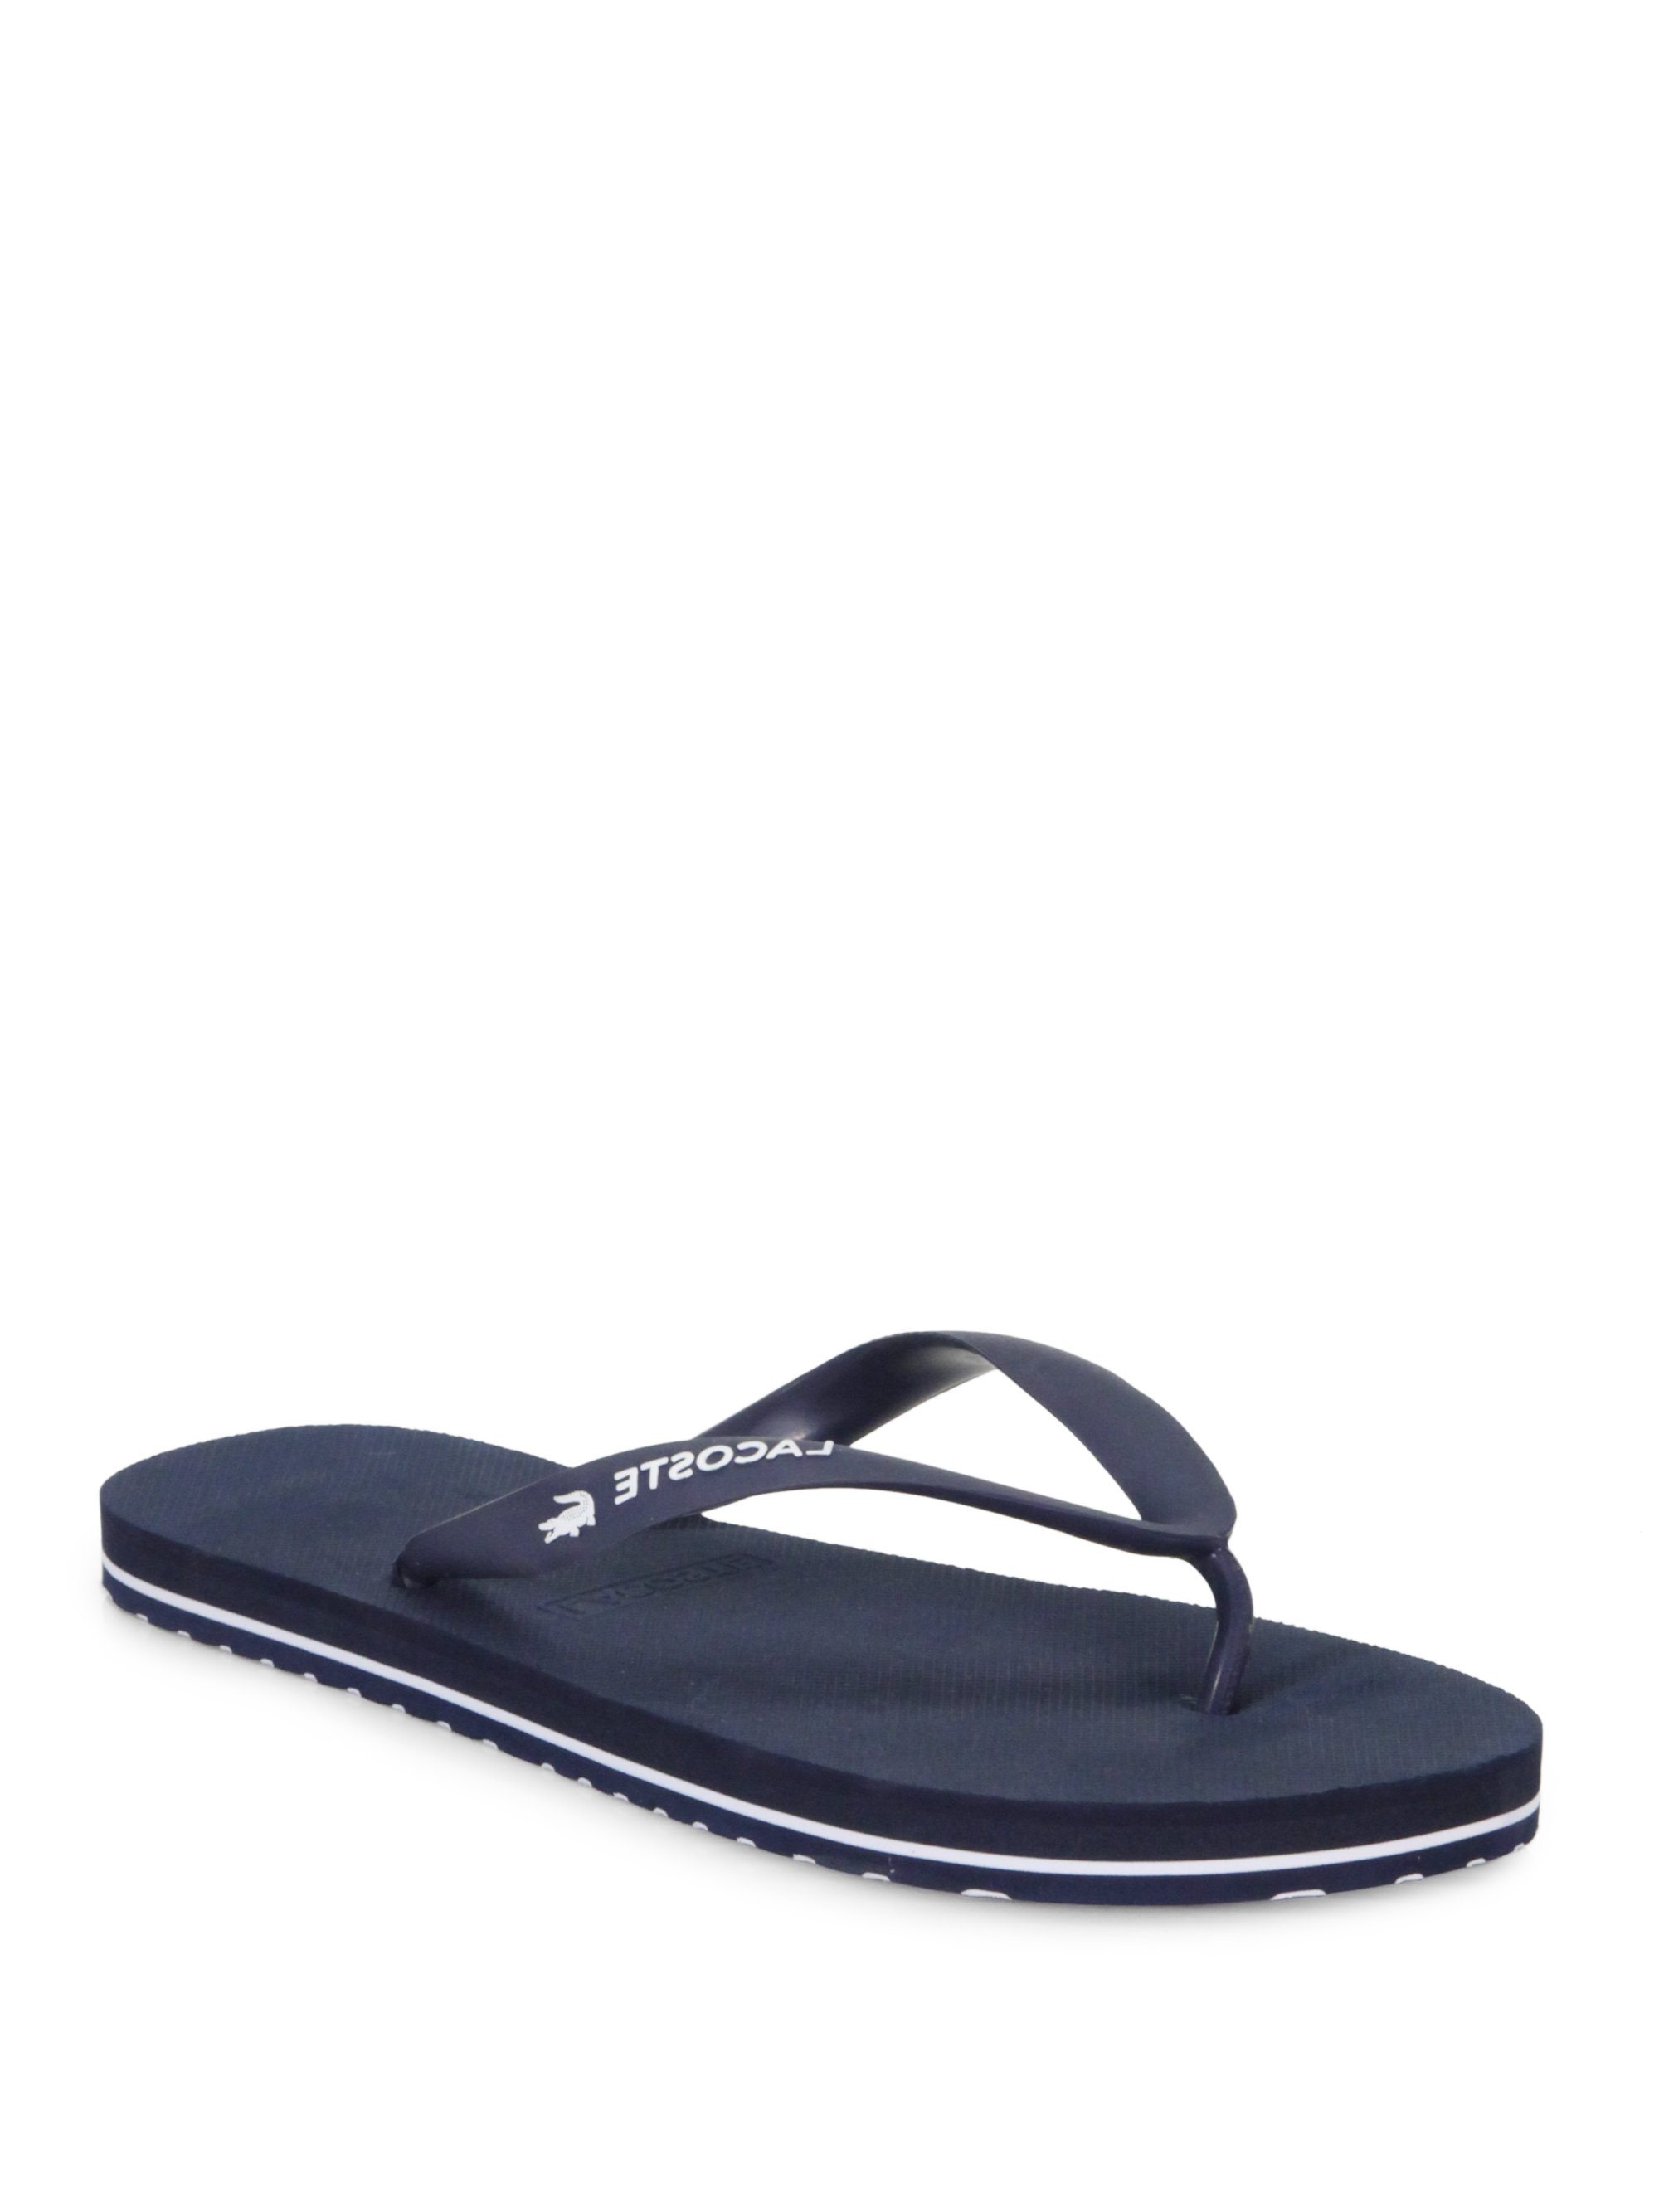 Lacoste Thong Flip Flops in Blue for 